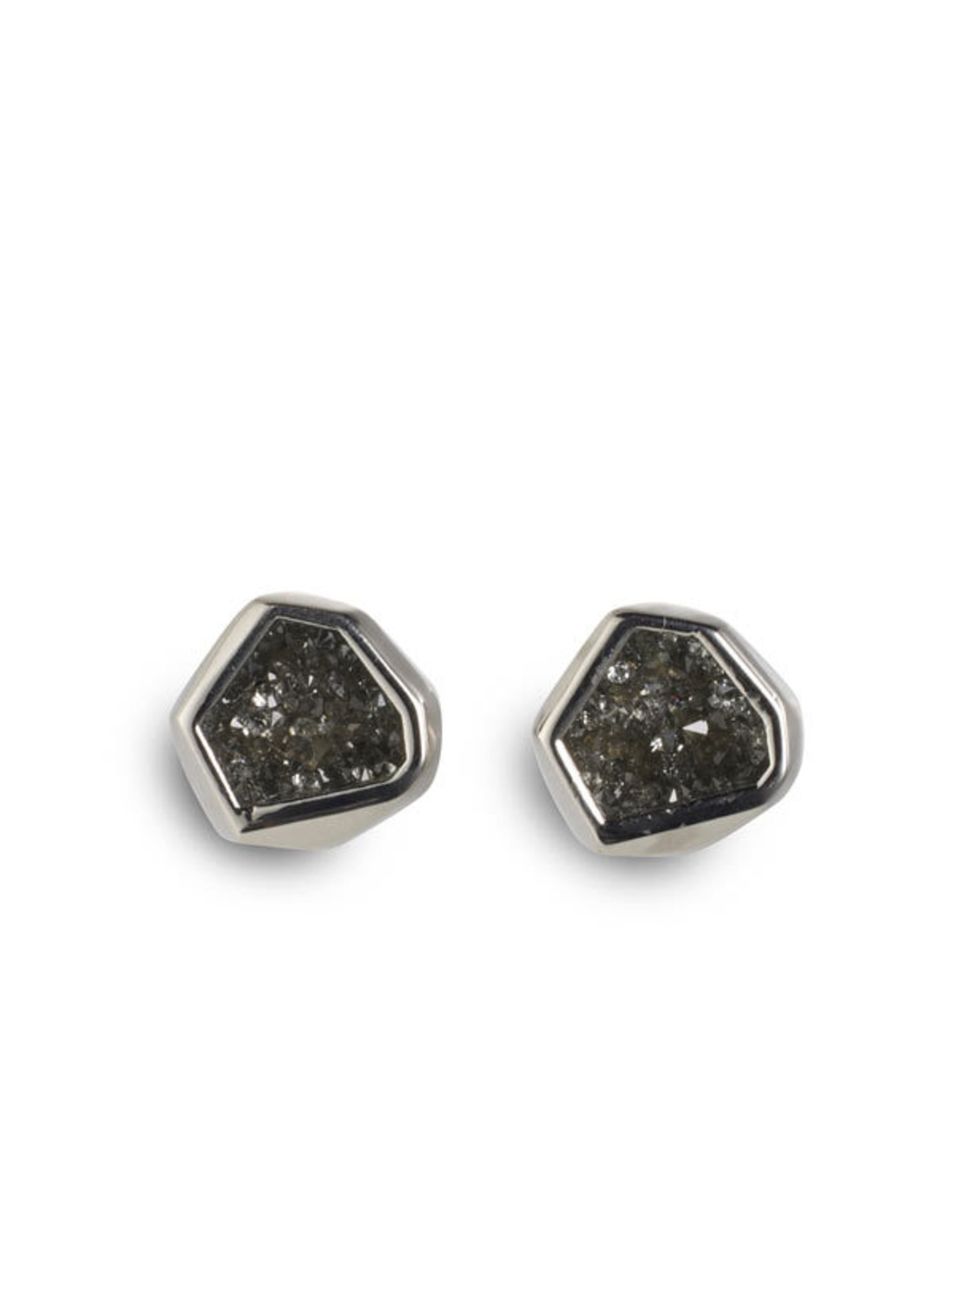 <p>Atelier Swarovski by Arik Levy earrings, £100, for stockists call 0207 255 8410</p>